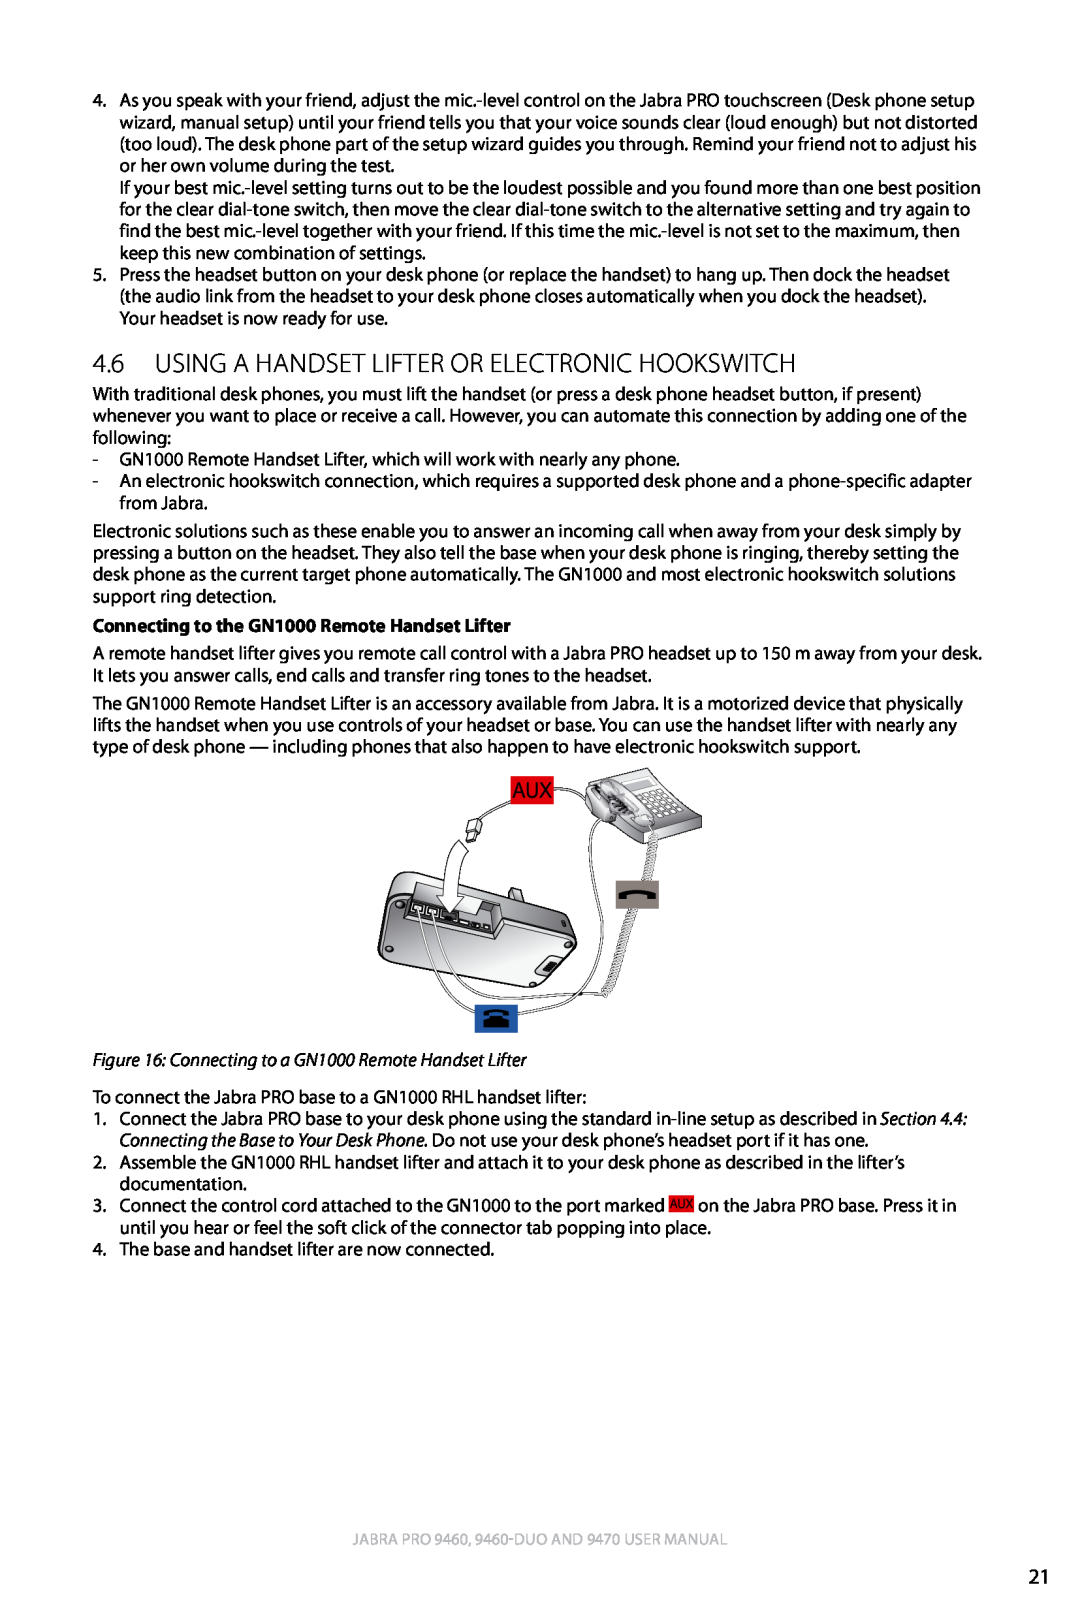 Lennox Hearth 9470 user manual english, Connecting to the GN1000 Remote Handset Lifter 